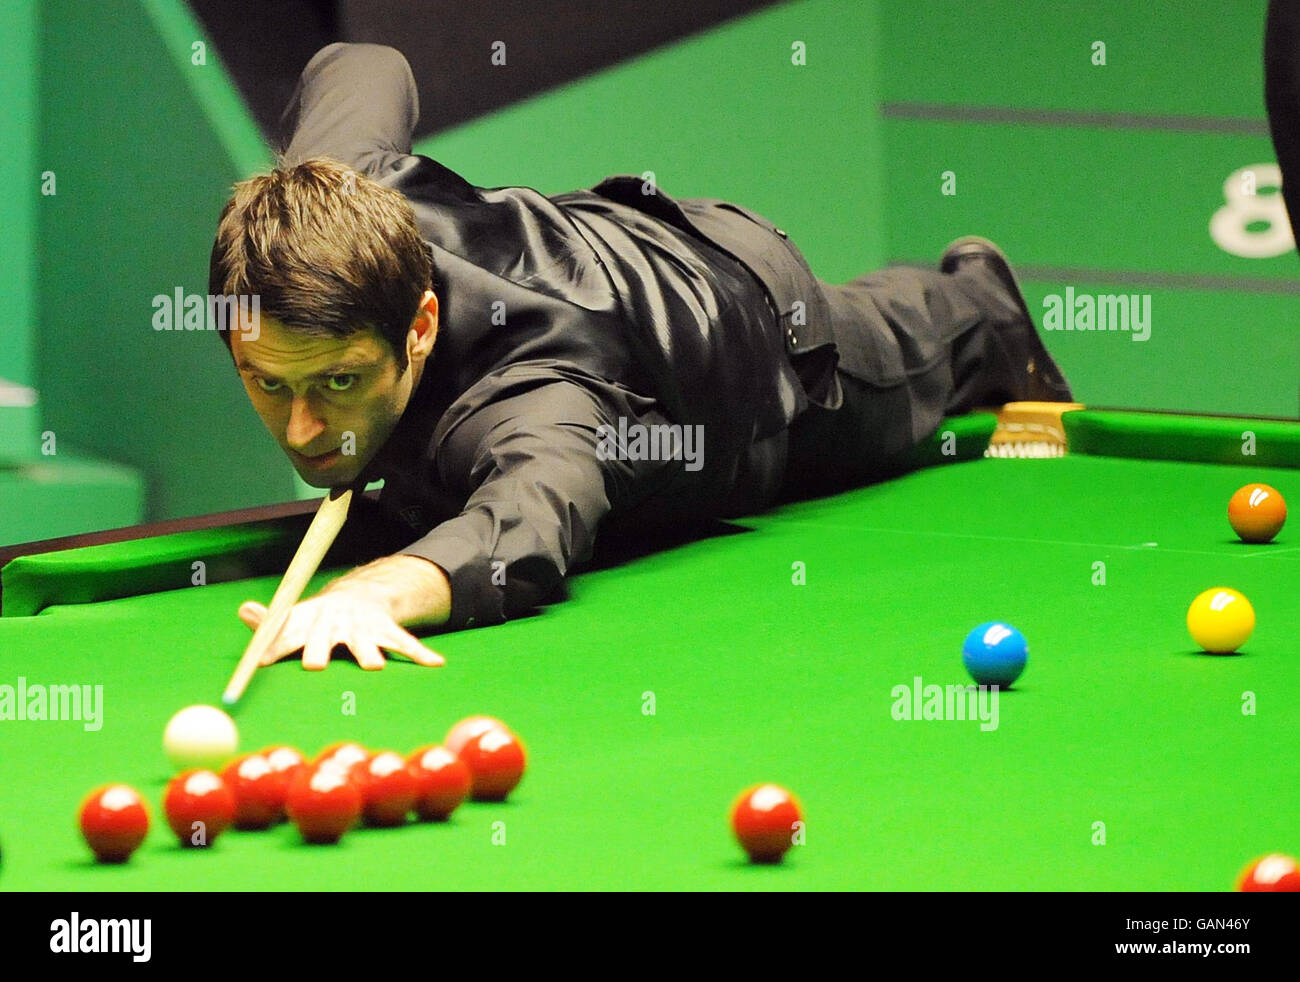 Ronnie OSullivan at the table during his semi final match in the 888 World Snooker Championship at the Crucible Theatre, Sheffield Stock Photo